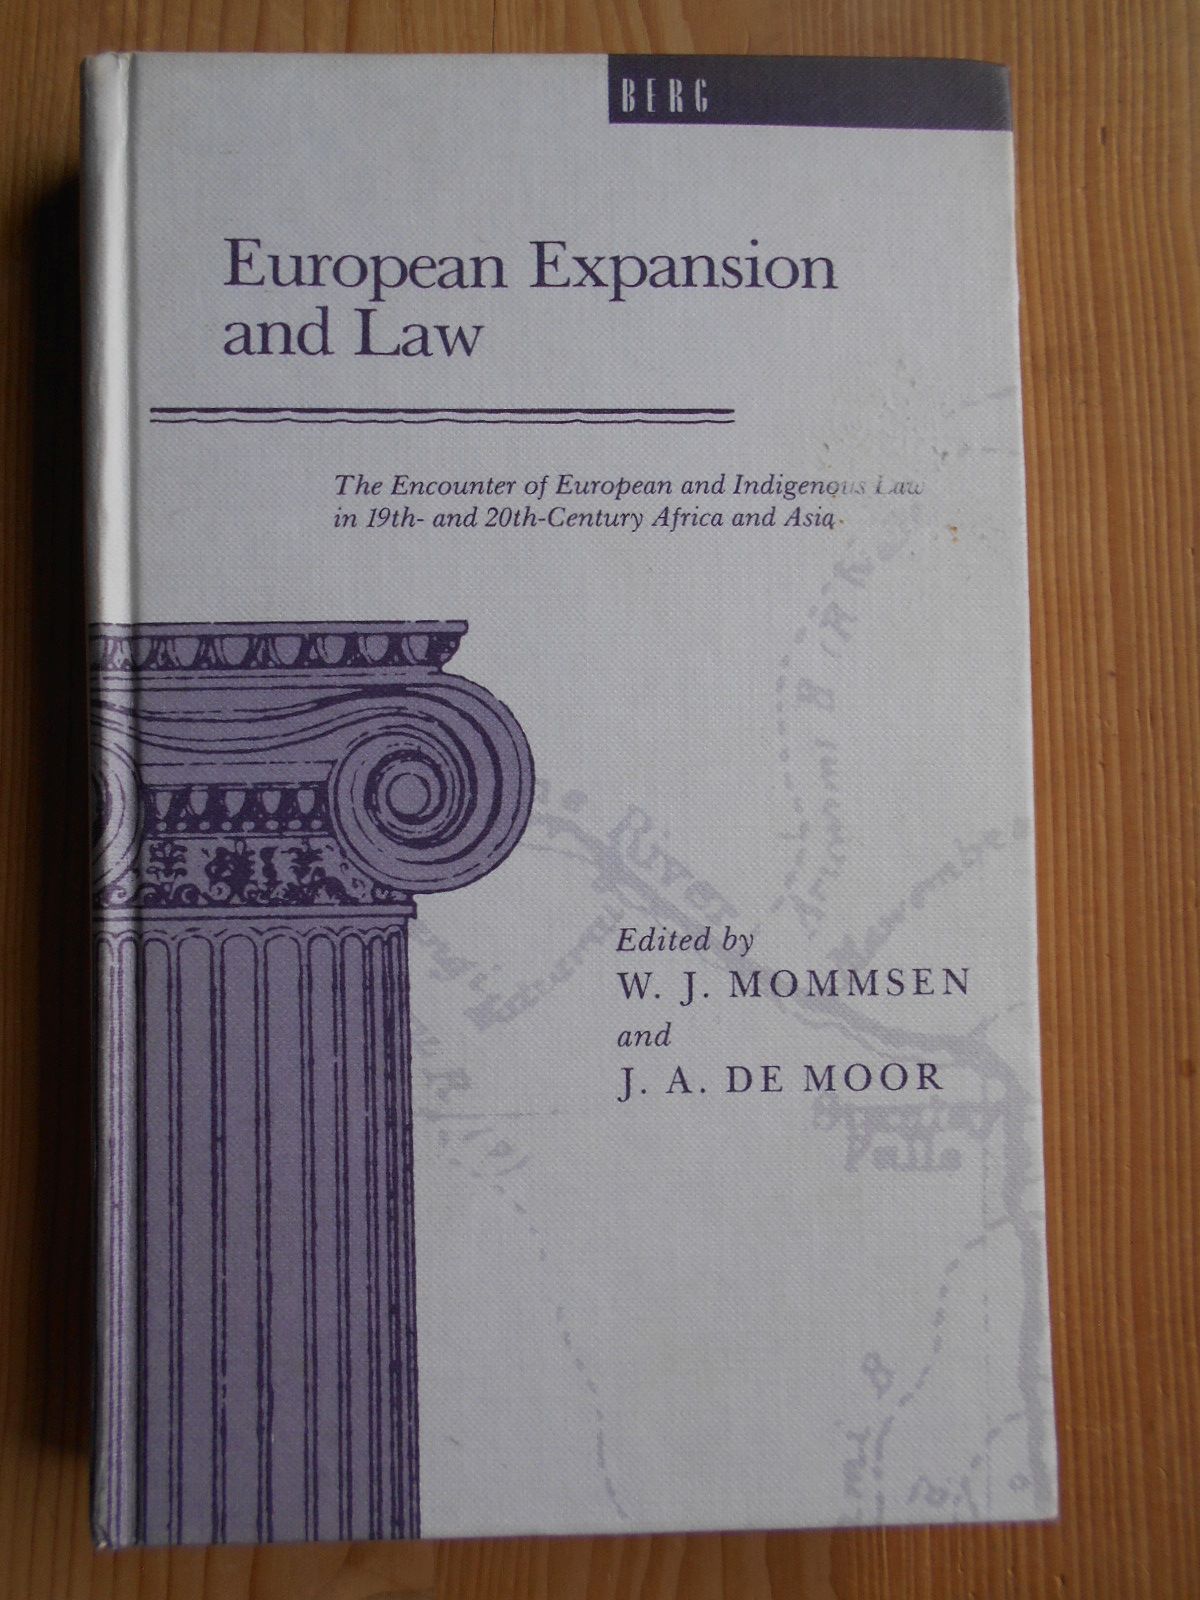 European Expansion and Law: The Encounter of European and Indigenous Law in the 19th- and 20th-Century Africa and Asia: The Encounter of European and . Law in 19th- And 20th-Century Africa and Asia. Edited by W.J. Mommsen and J.A. Moor. - Mommsen, W. J. (Hrsg.) and J. A. de Moor